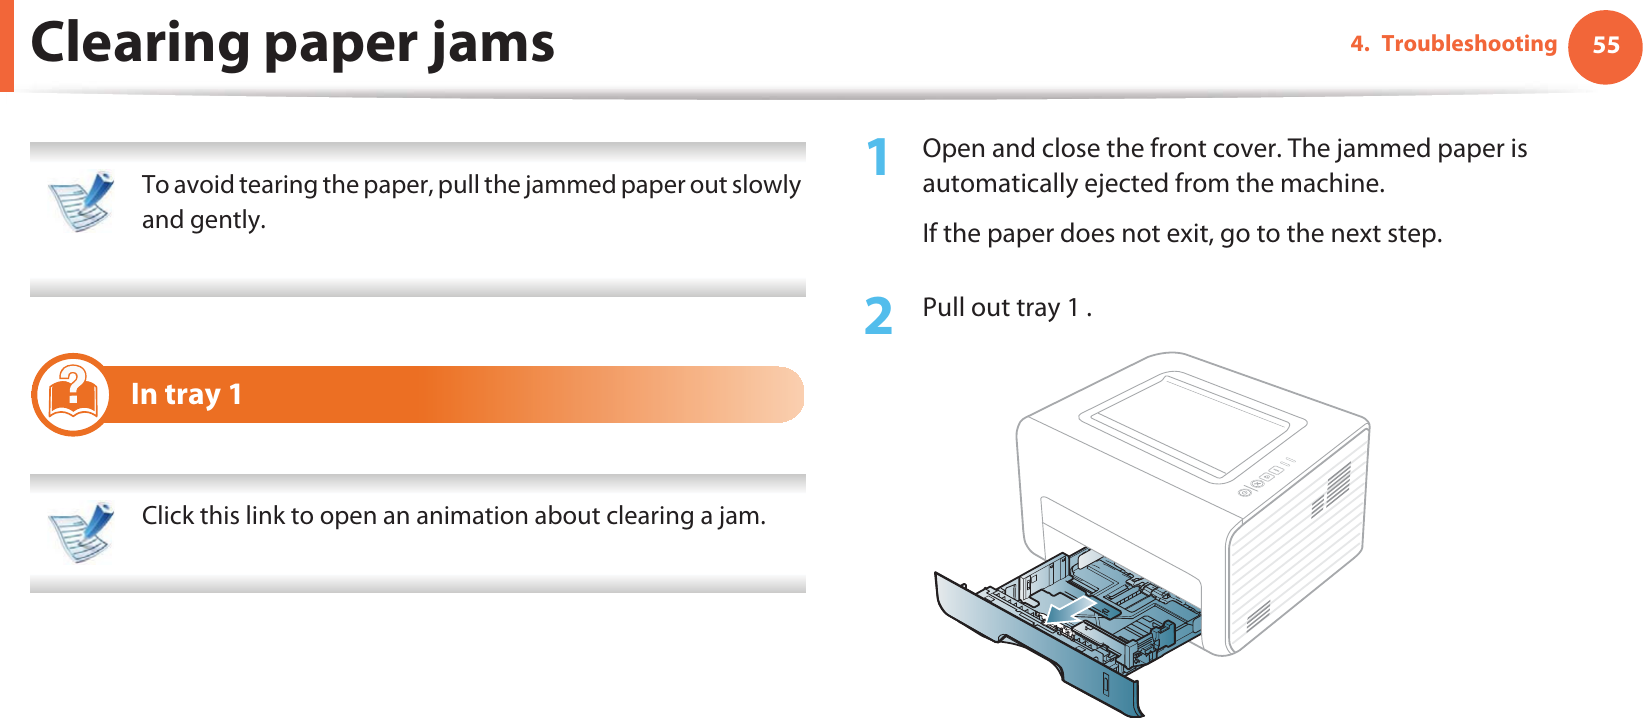 554. TroubleshootingClearing paper jams To avoid tearing the paper, pull the jammed paper out slowly and gently.  1 In tray 1 Click this link to open an animation about clearing a jam. 1Open and close the front cover. The jammed paper is automatically ejected from the machine.If the paper does not exit, go to the next step.2  Pull out tray 1 .